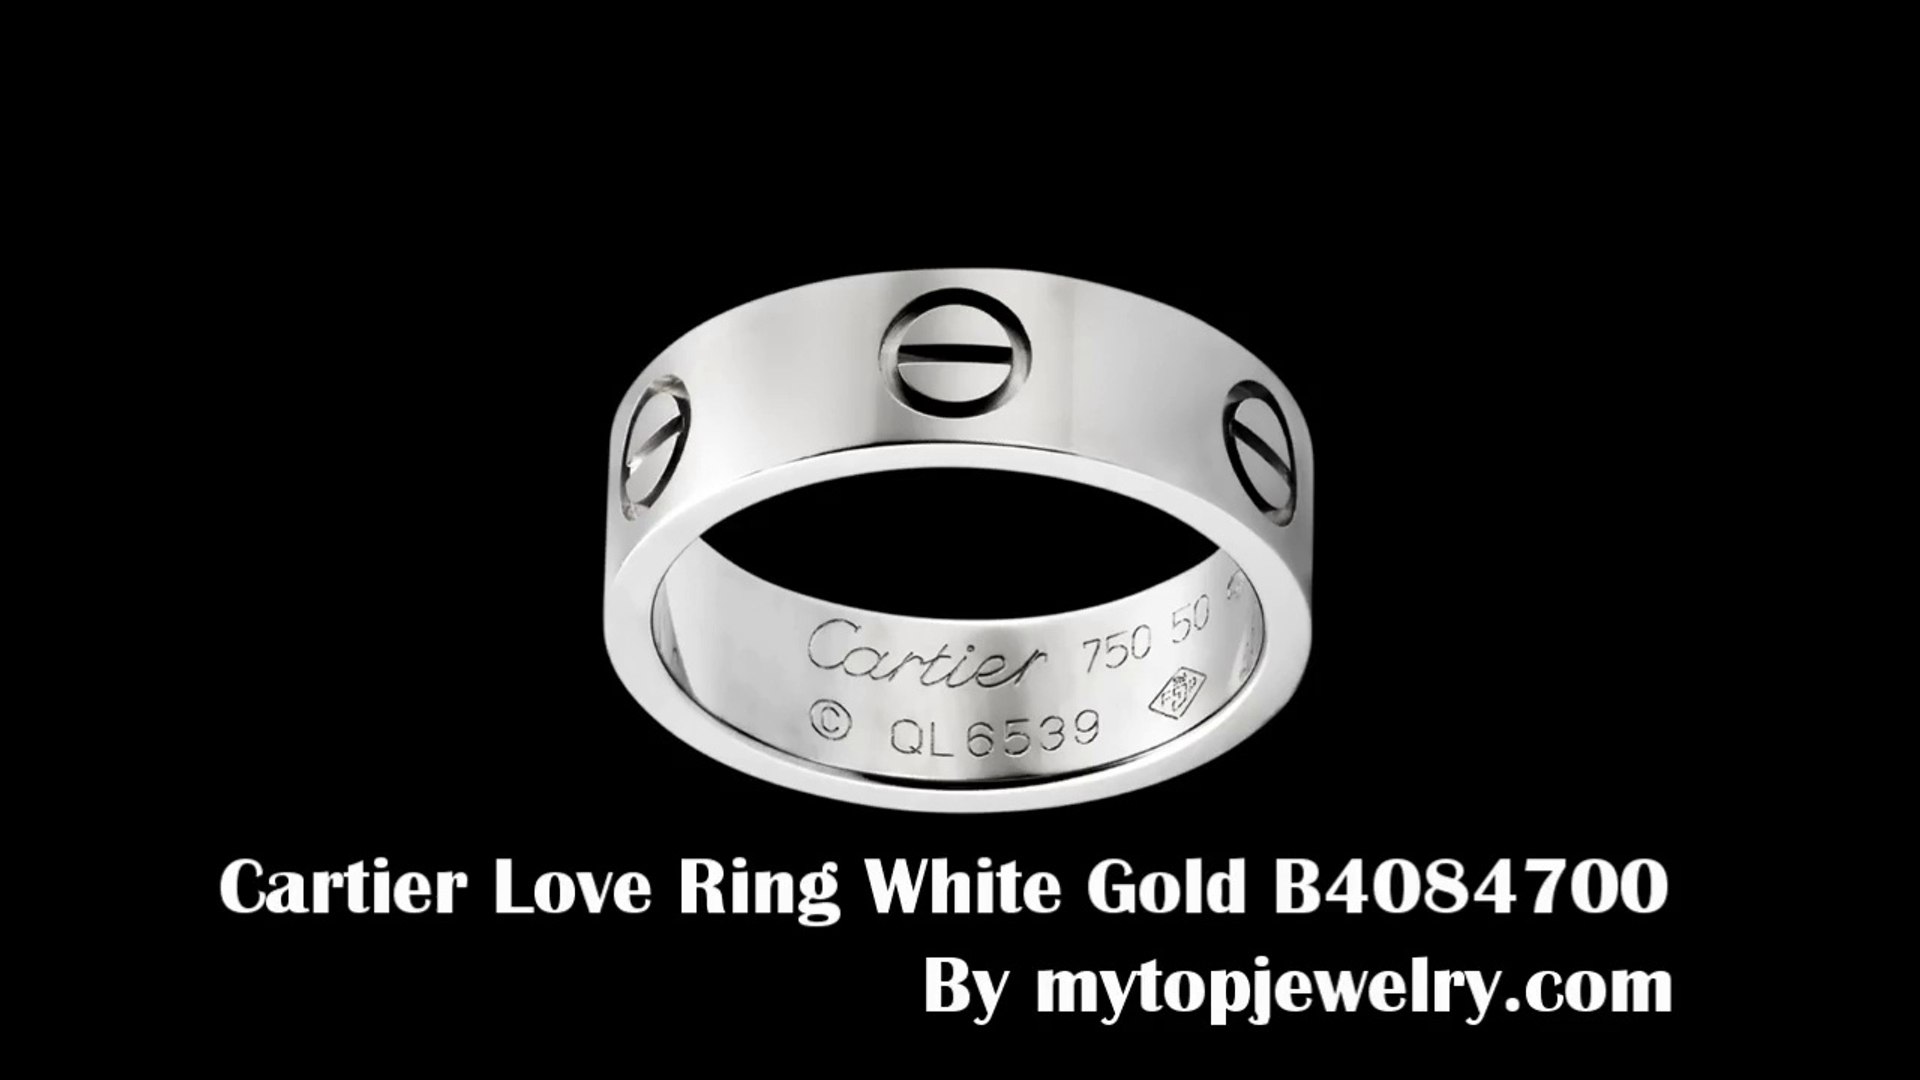 Cartier Love Ring - Cartier Love Ring White Gold B4084700 - video  Dailymotion